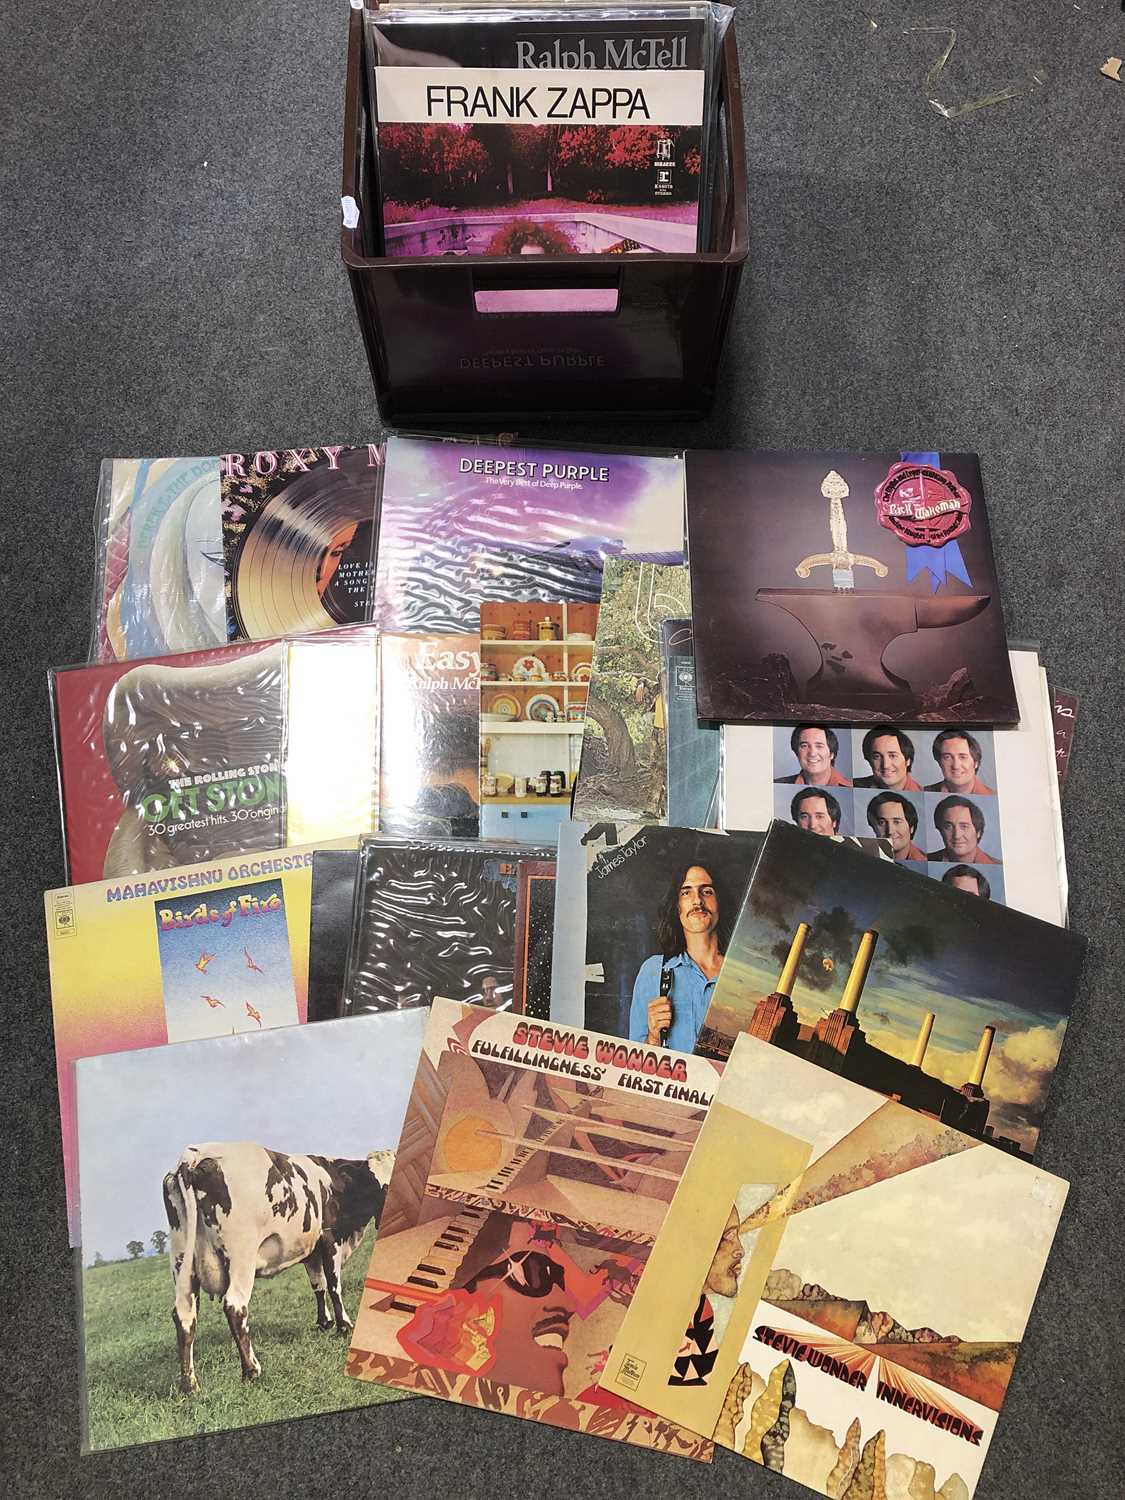 Lot 38 - Collection of Vinyl LP records; Fourty-two including Skid Row, Pink Floyd, Bob Dylan, Frank Zappa, and other.